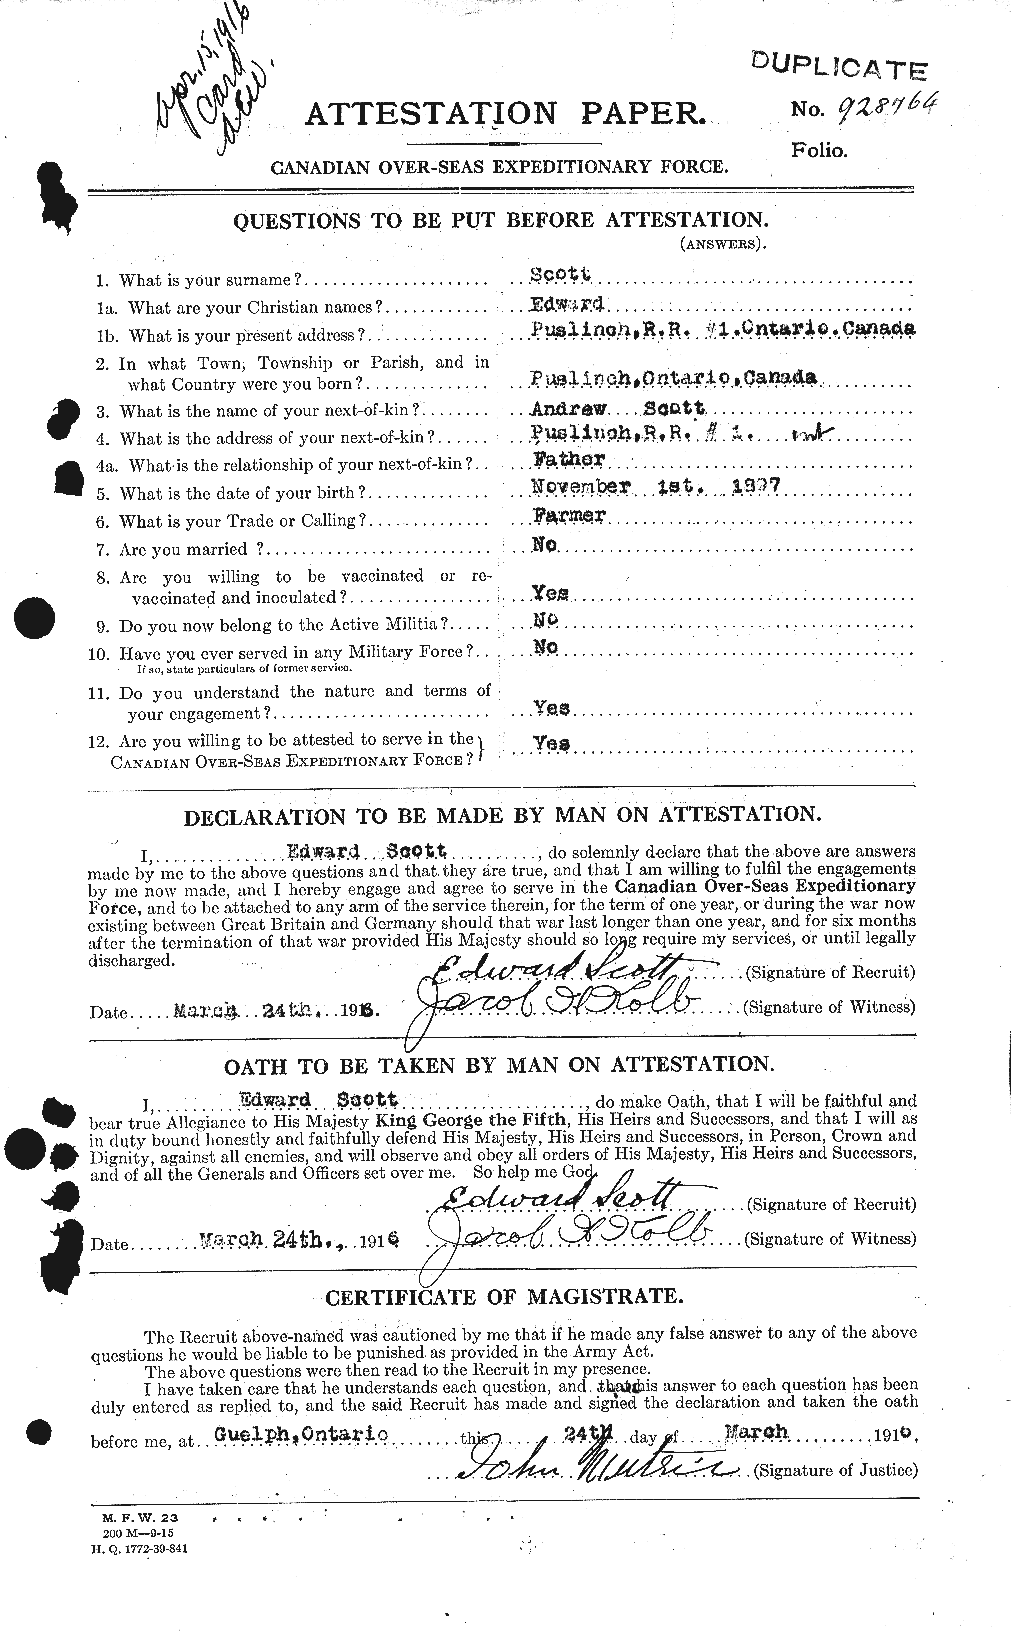 Personnel Records of the First World War - CEF 085048a